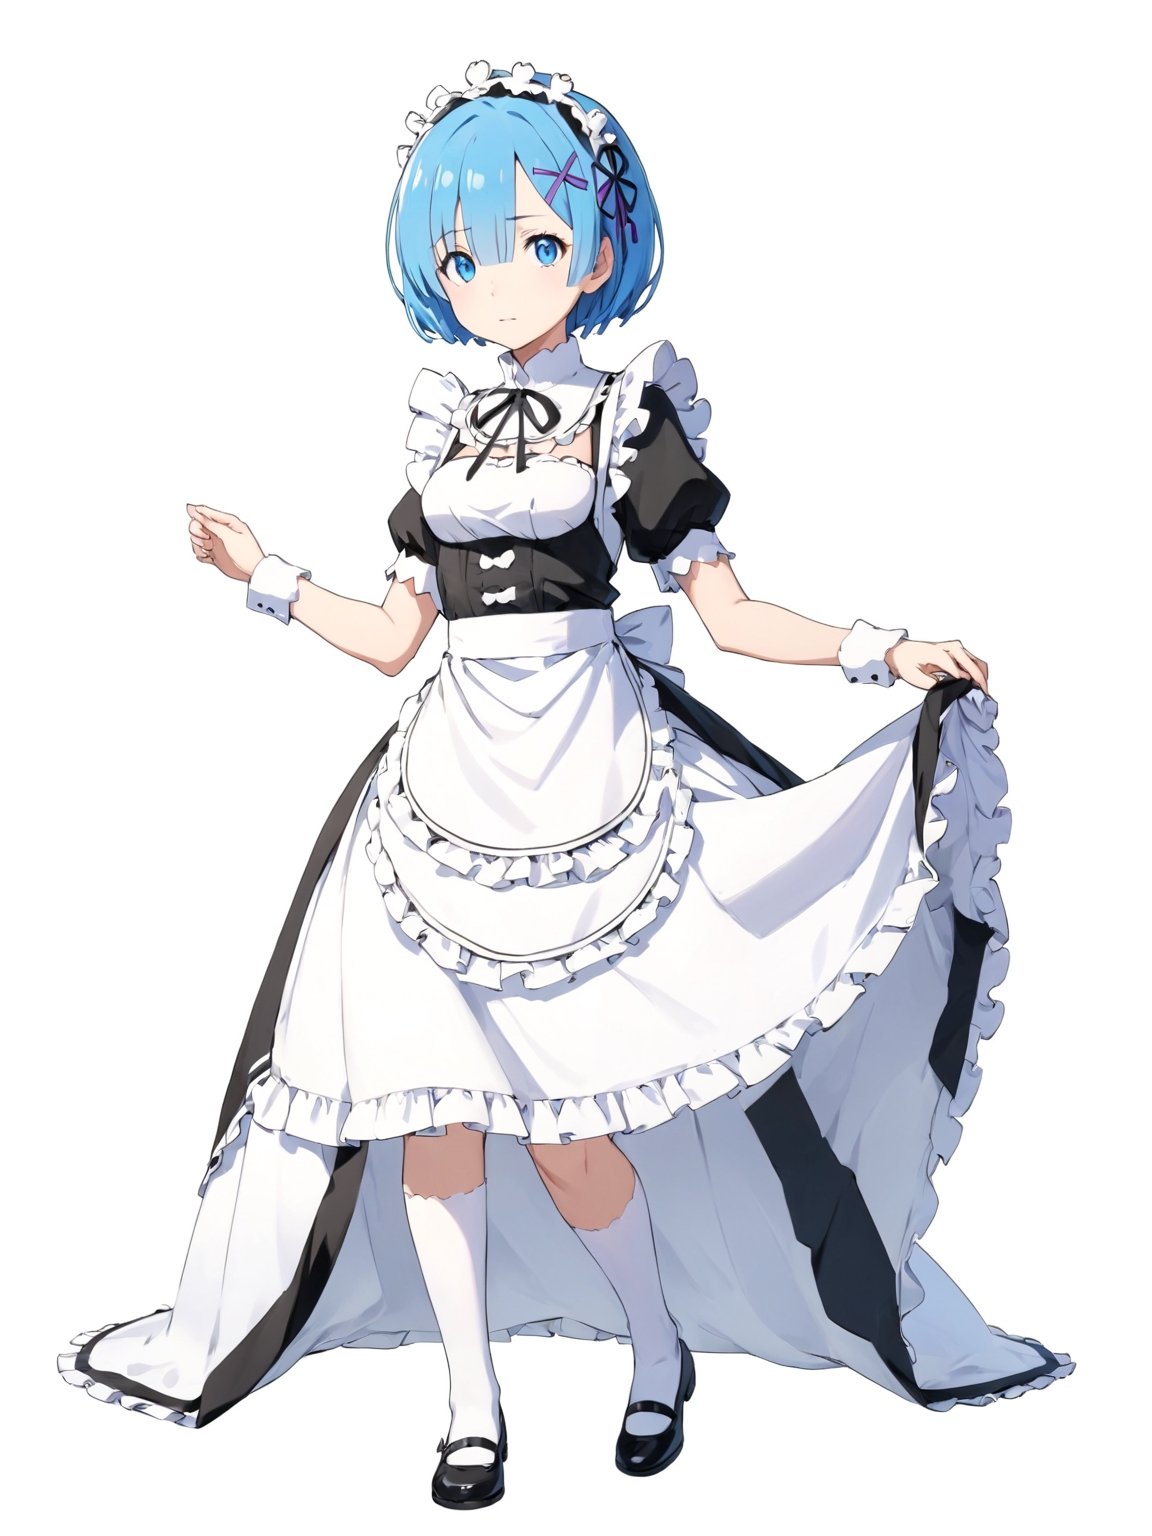 //Quality,
masterpiece, best quality, detailed
,//Character,
solo,rem \(re_zero\), 1girl, blue eyes, blue hair, short hair
,//Fashion,
roswaal mansion maid uniform, hair ribbon
,//Background,
white_background, simple_background
,//Others,
full_body